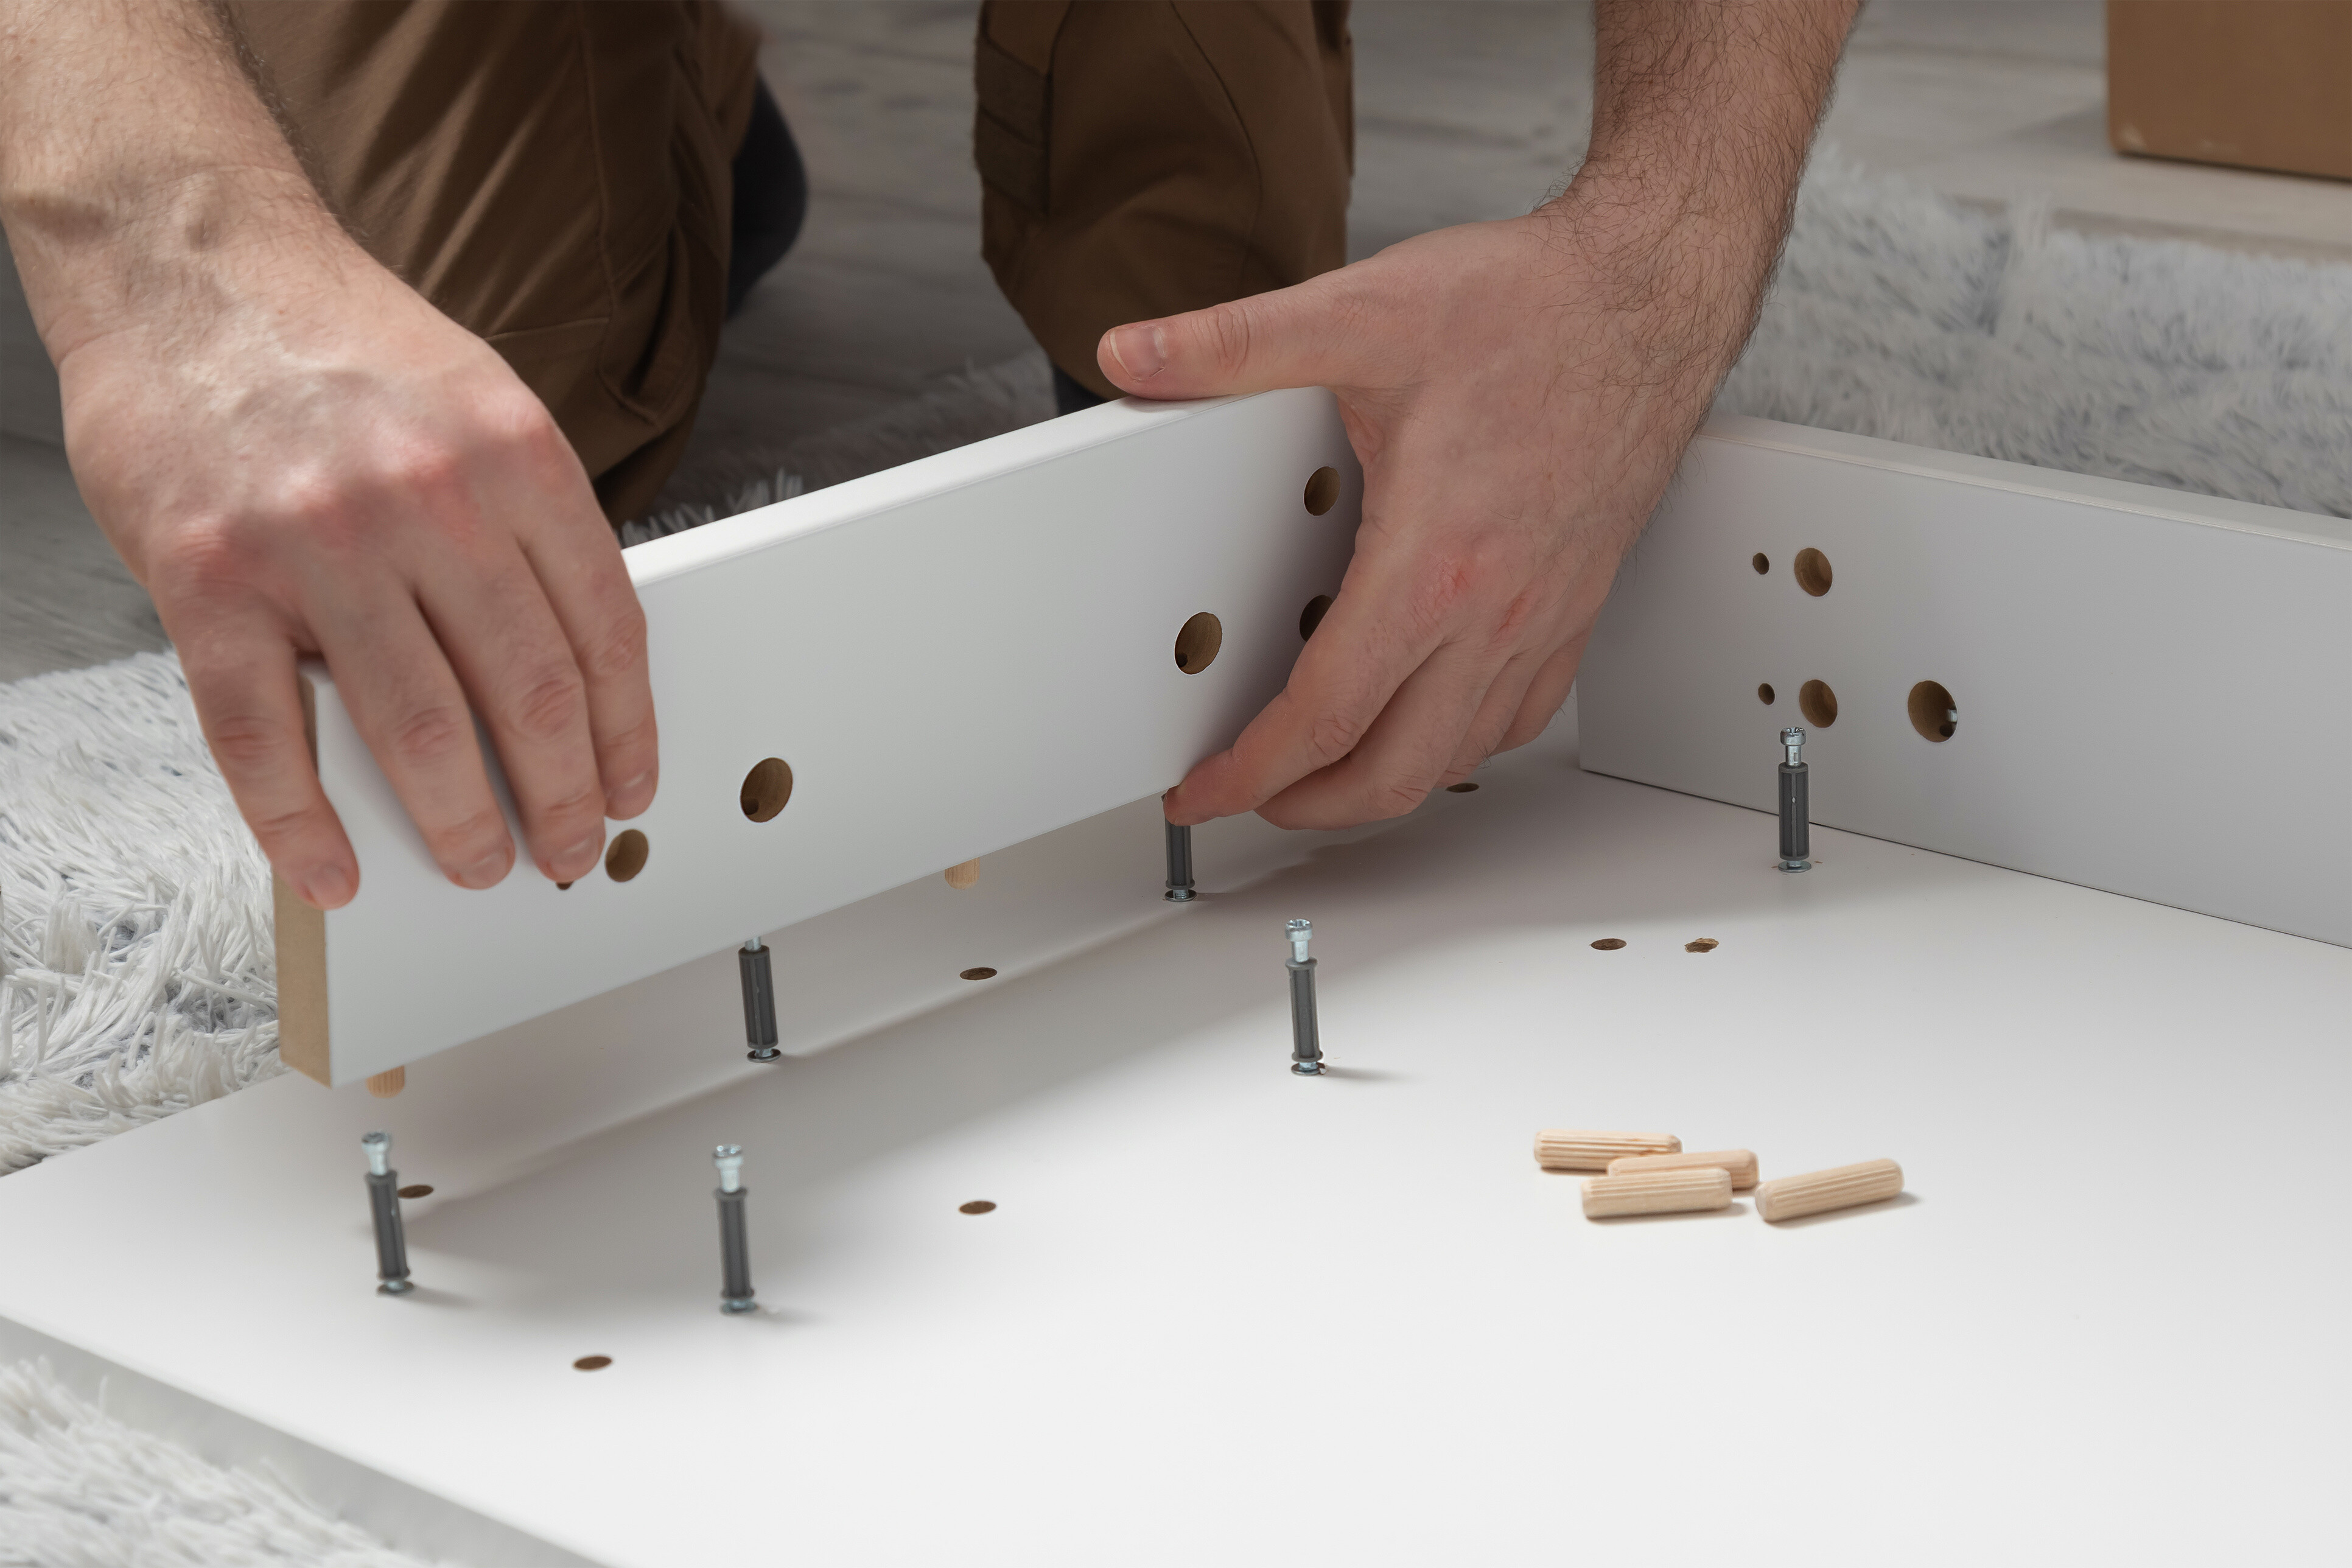 A pair of hands being shown putting a table together on a white carpet.